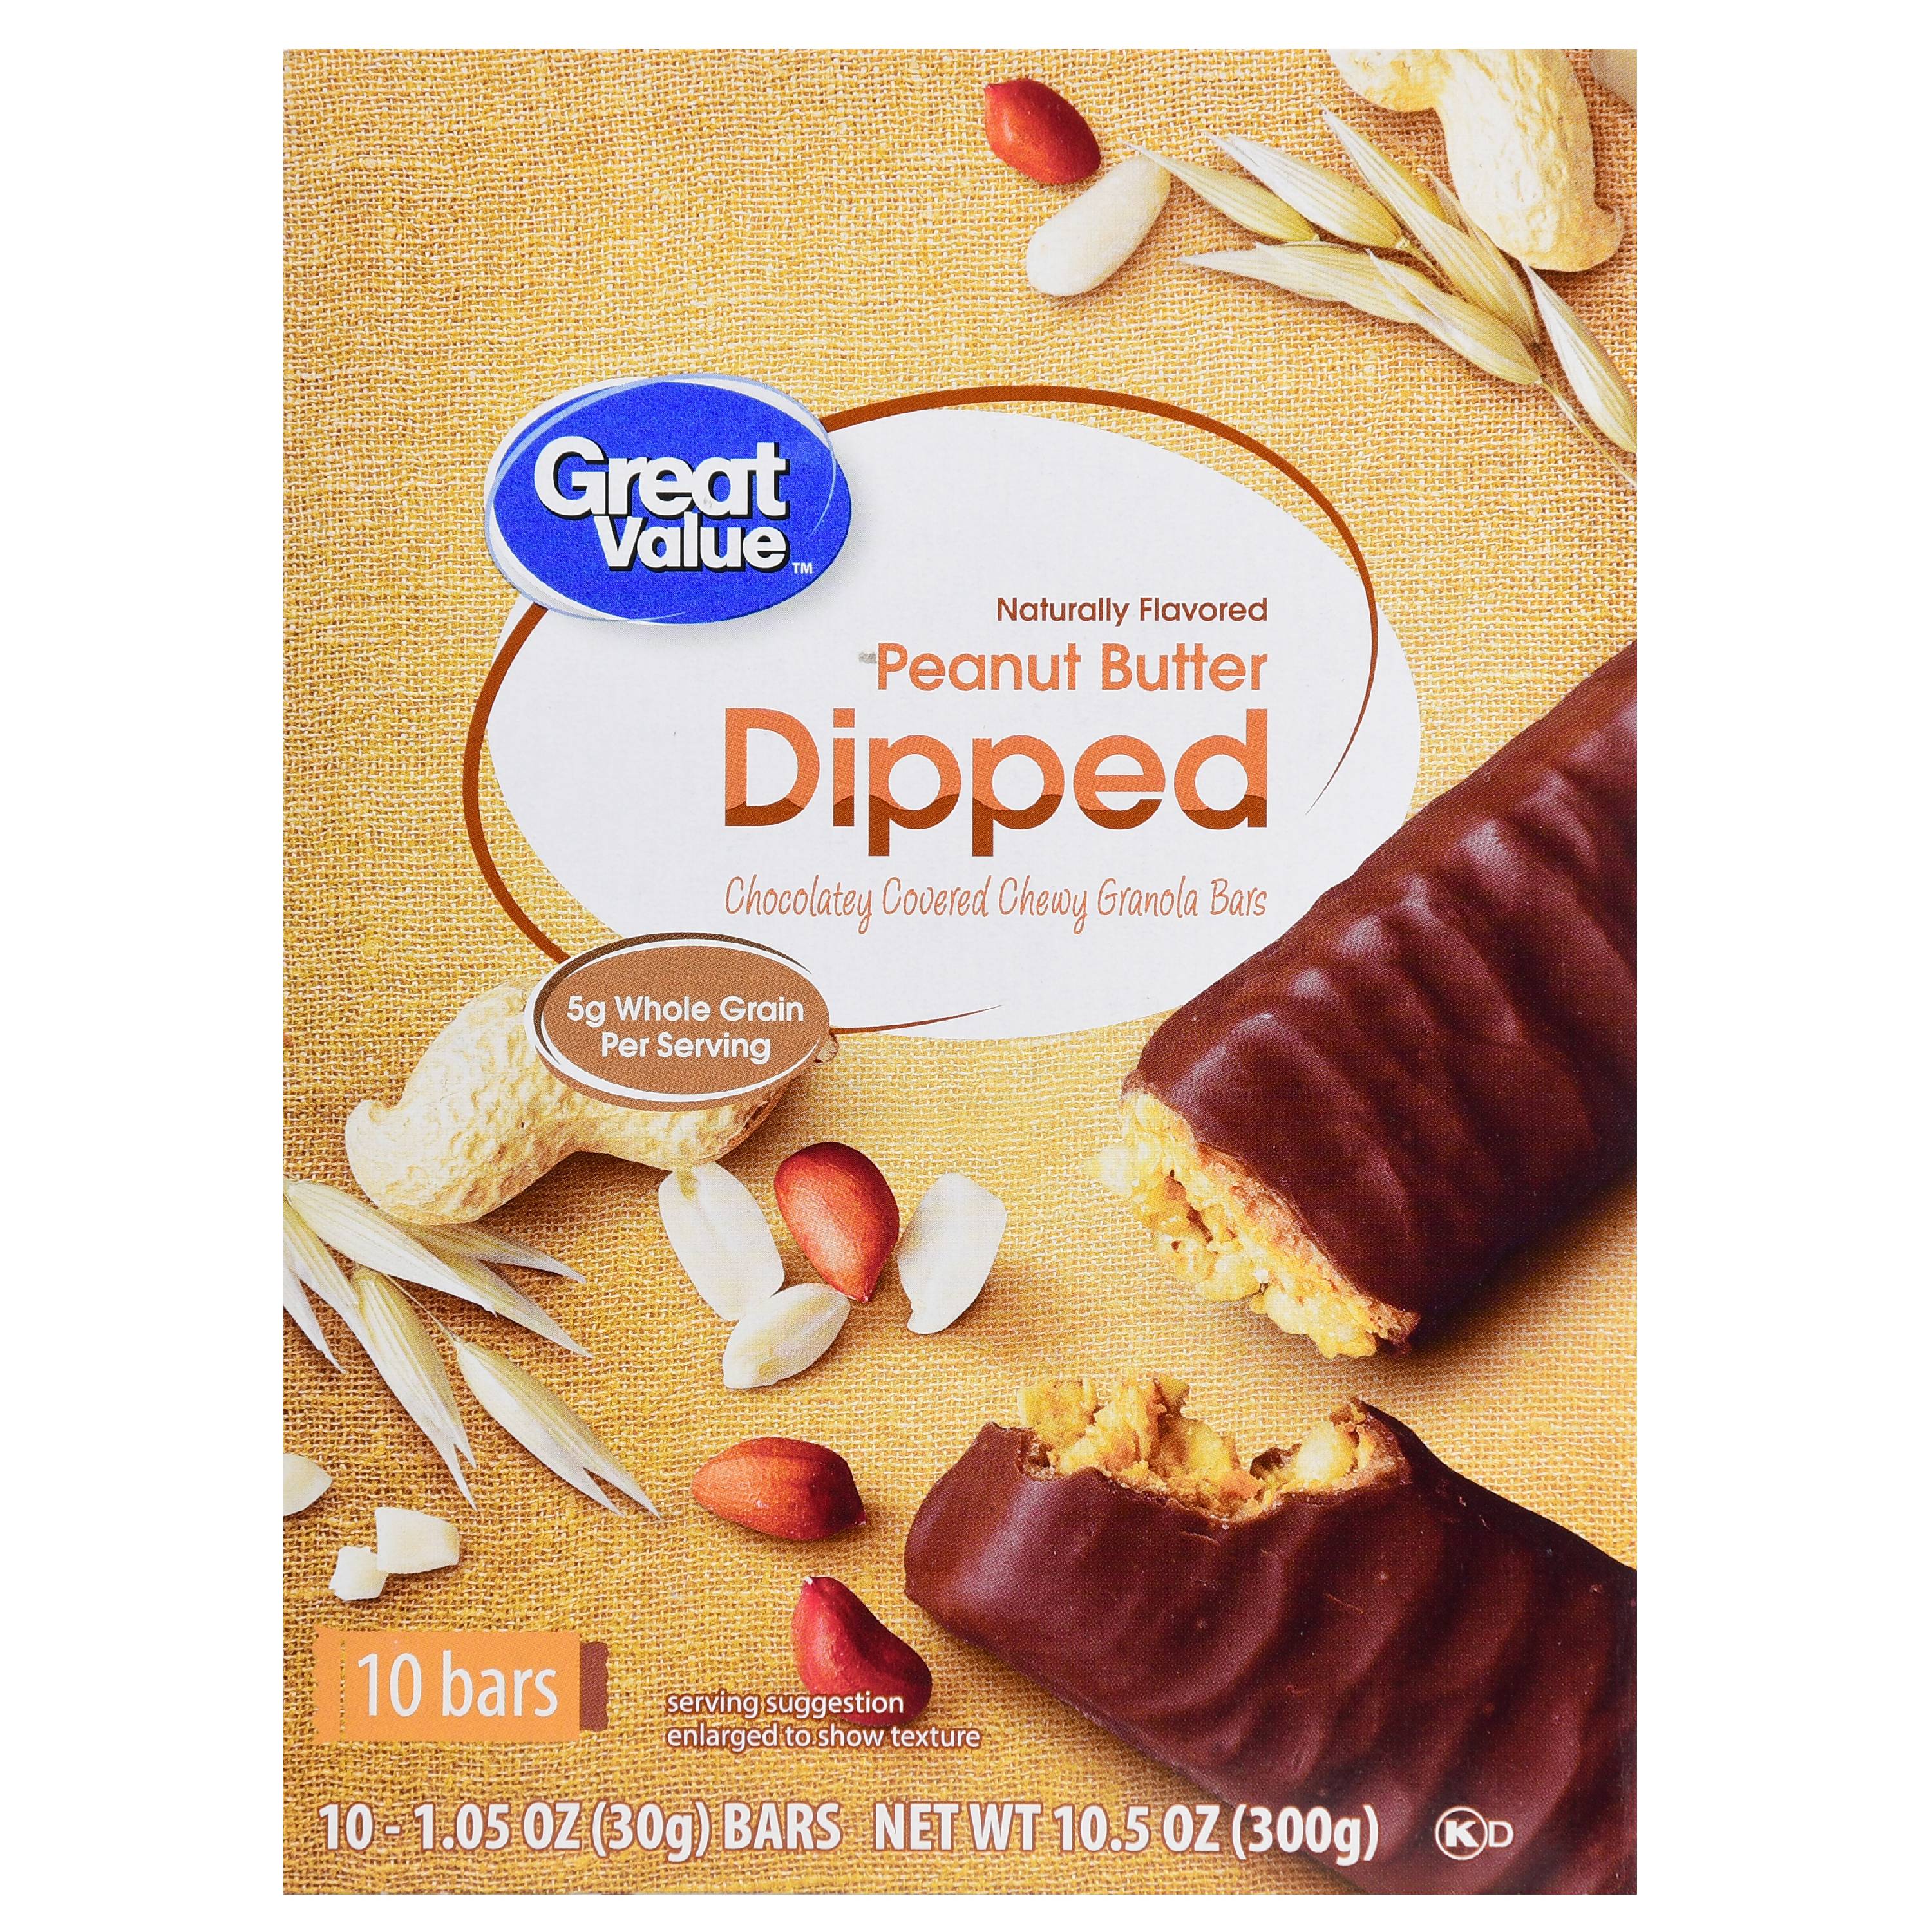 Great Value Chocolate Dipped Chewy Granola Bars Peanut Butter 10.5 Oz 10 Count Image